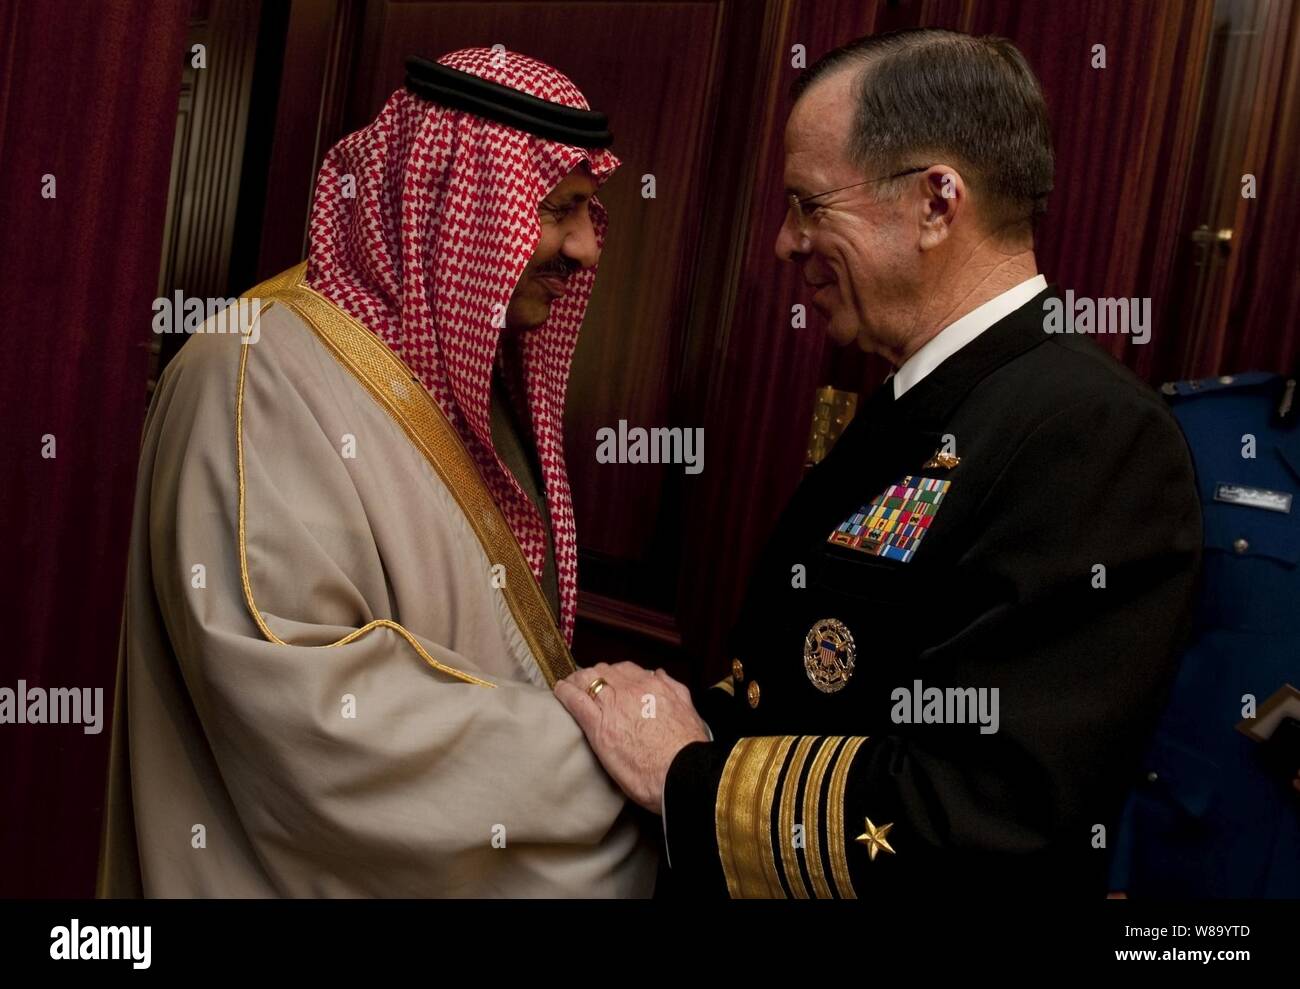 Chairman of the Joint Chiefs of Staff Adm. Mike Mullen, U.S. Navy, greets Saudi Arabian Assistant Minister of Defense and Aviation Prince Khalid bin Sultan in Riyadh on Feb. 21, 2011.  Mullen is on a weeklong trip through the Middle East to reassure friends and allies of the U.S. commitment to regional stability. Stock Photo